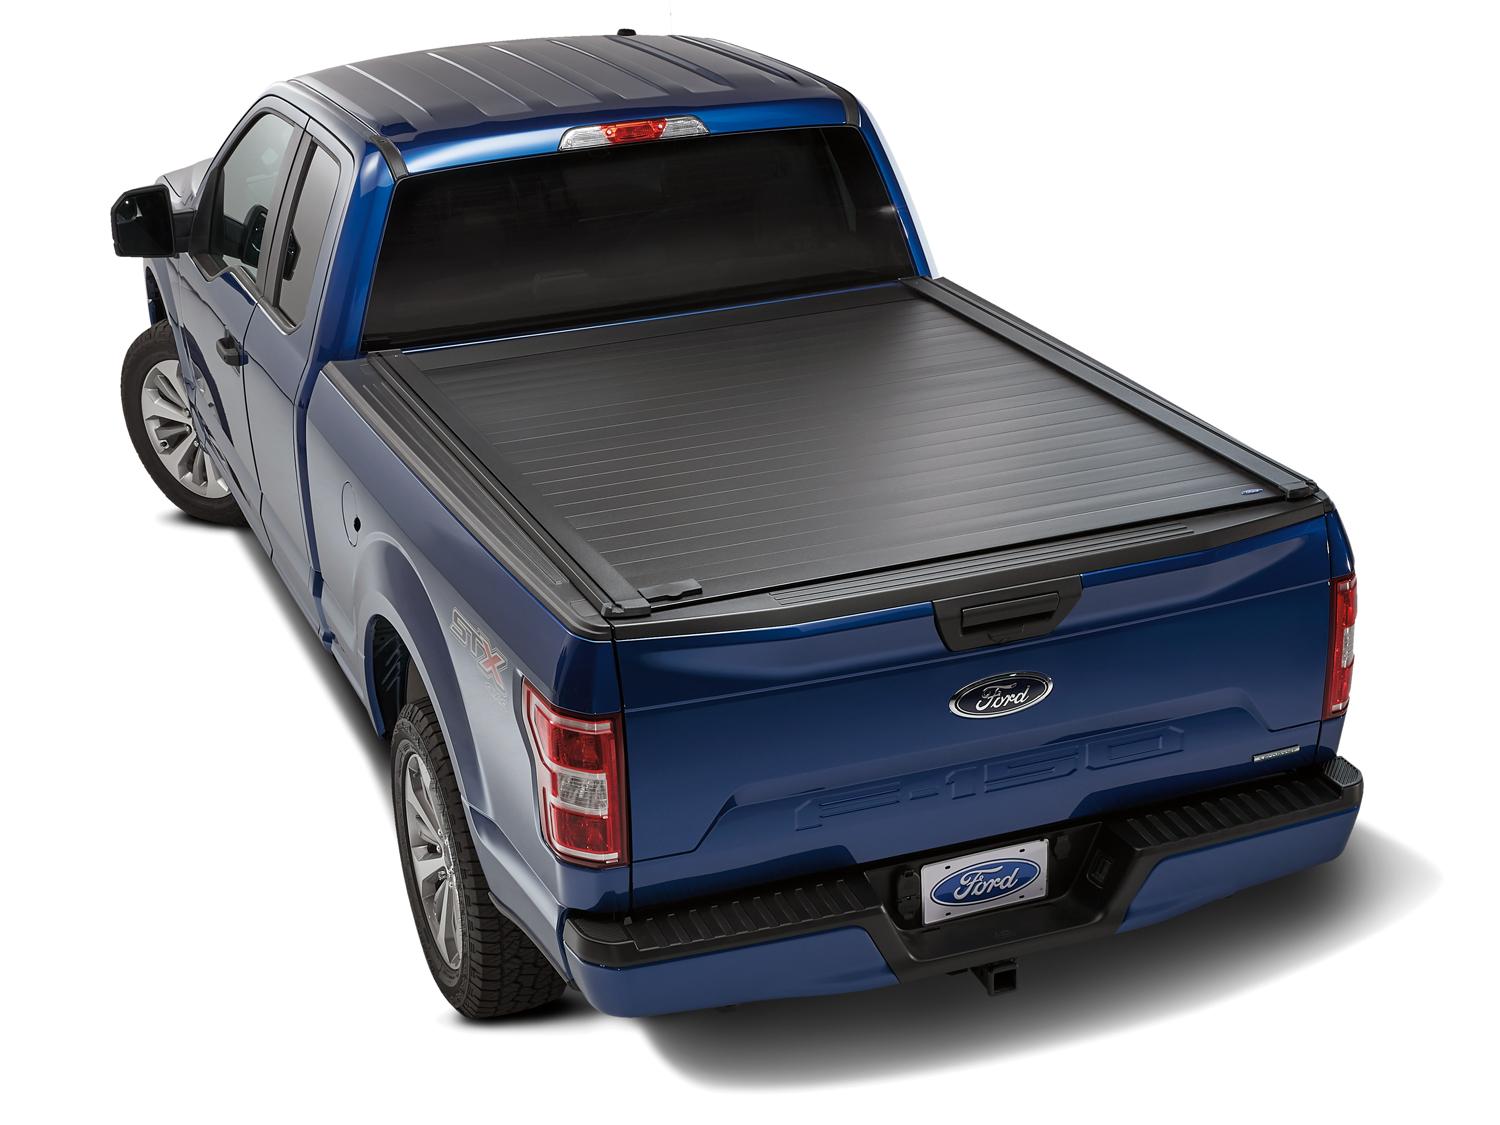 Image for Tonneau/Bed Cover - Embark LS Retractable, Matte Black, For 8.0 Bed from AccessoriesCanada